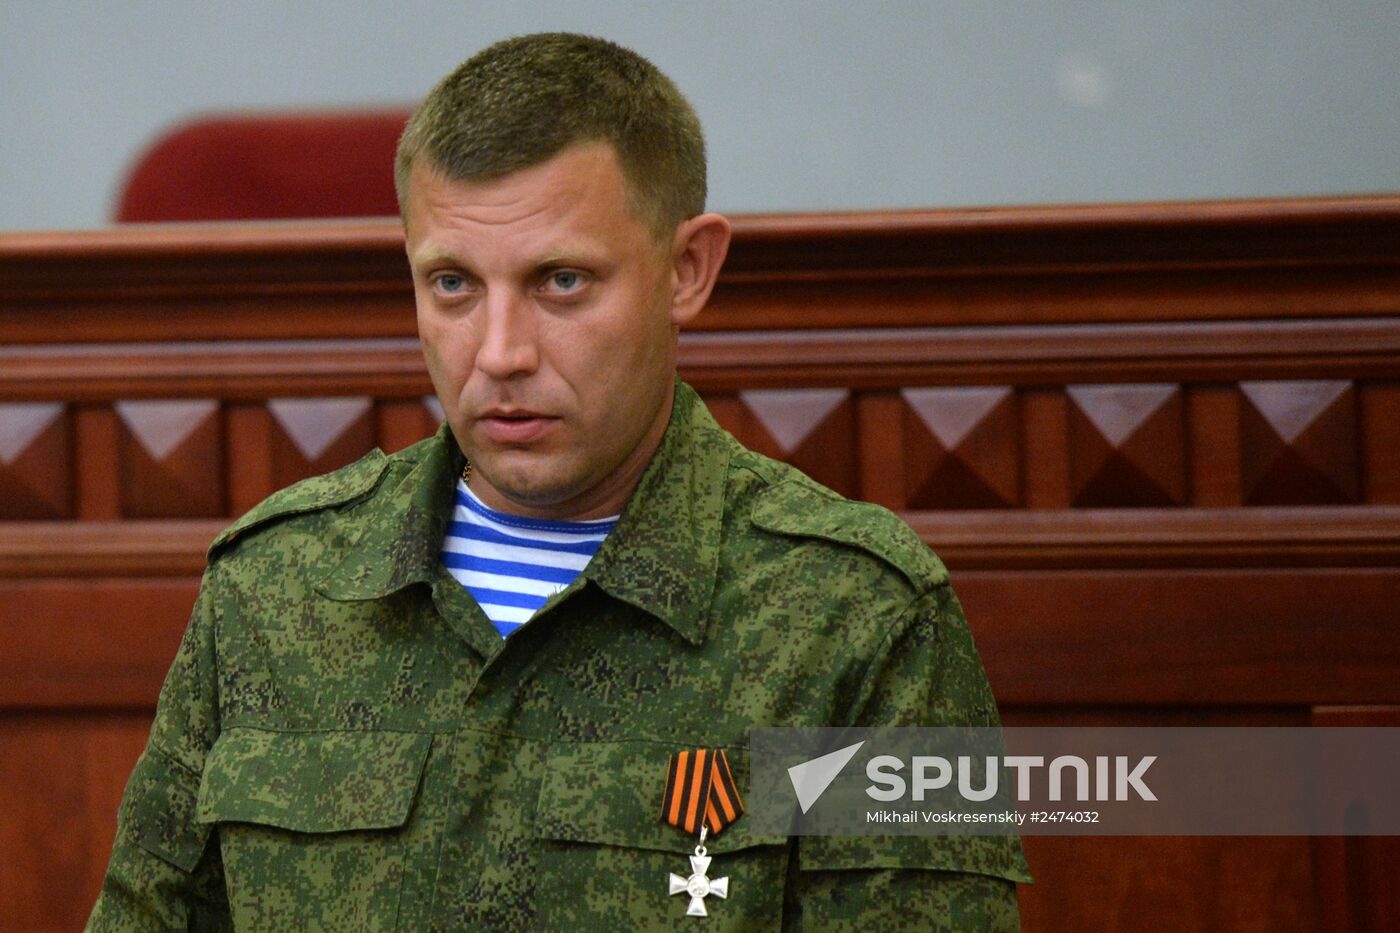 Alexander Zakharchenko appointed new Prime Minister of Donetsk People's Republic by republic's Supreme Council